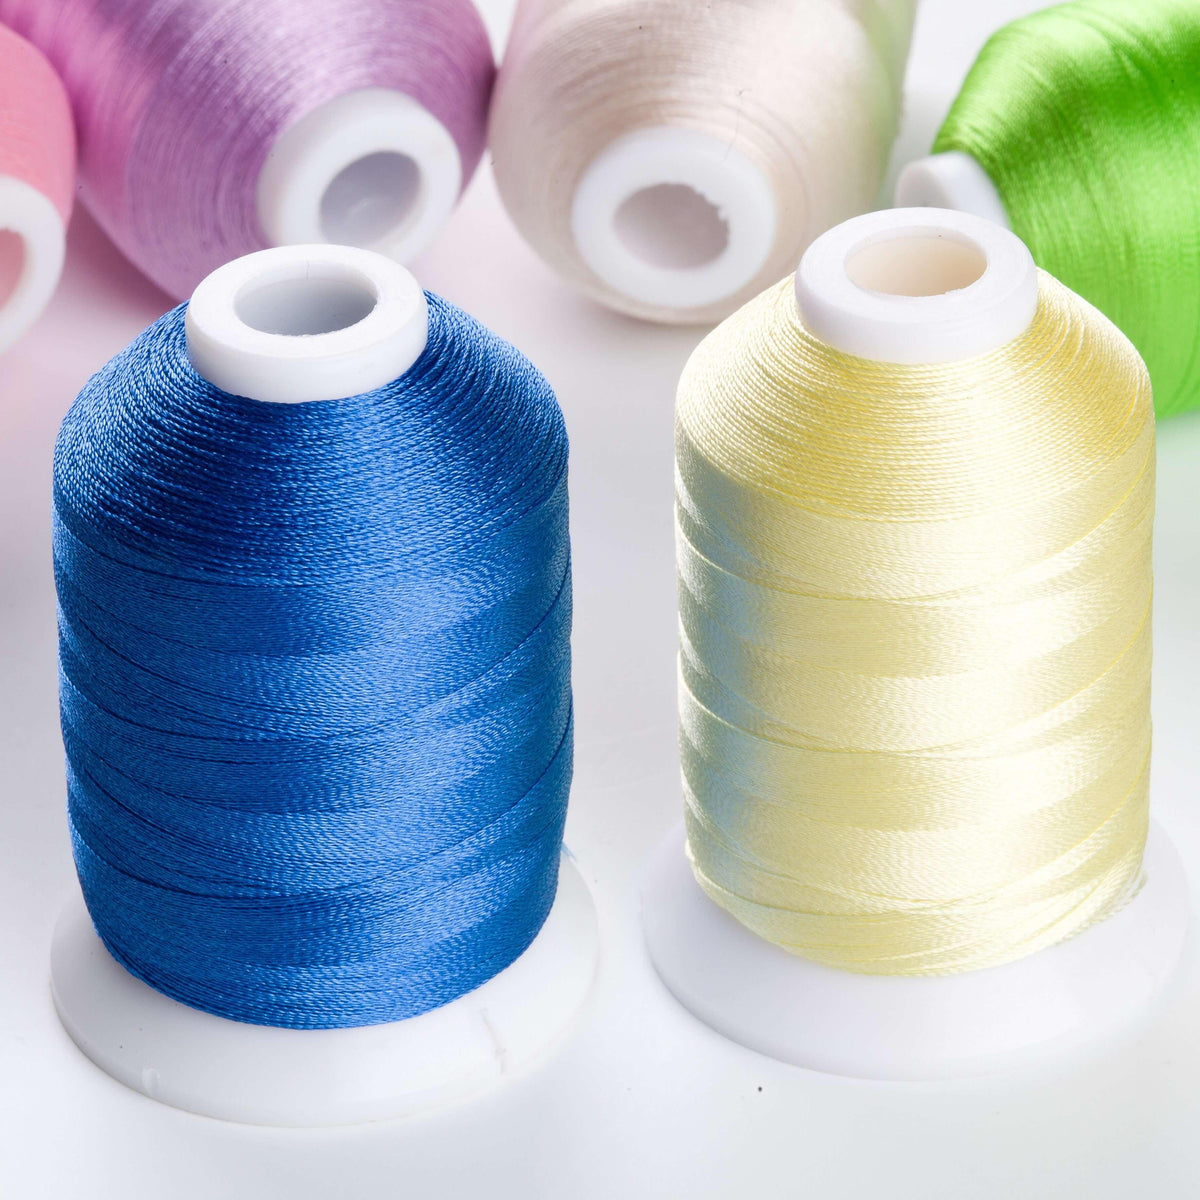 20 Colors of Polyester Embroidery Thread Set - Fresh Colors